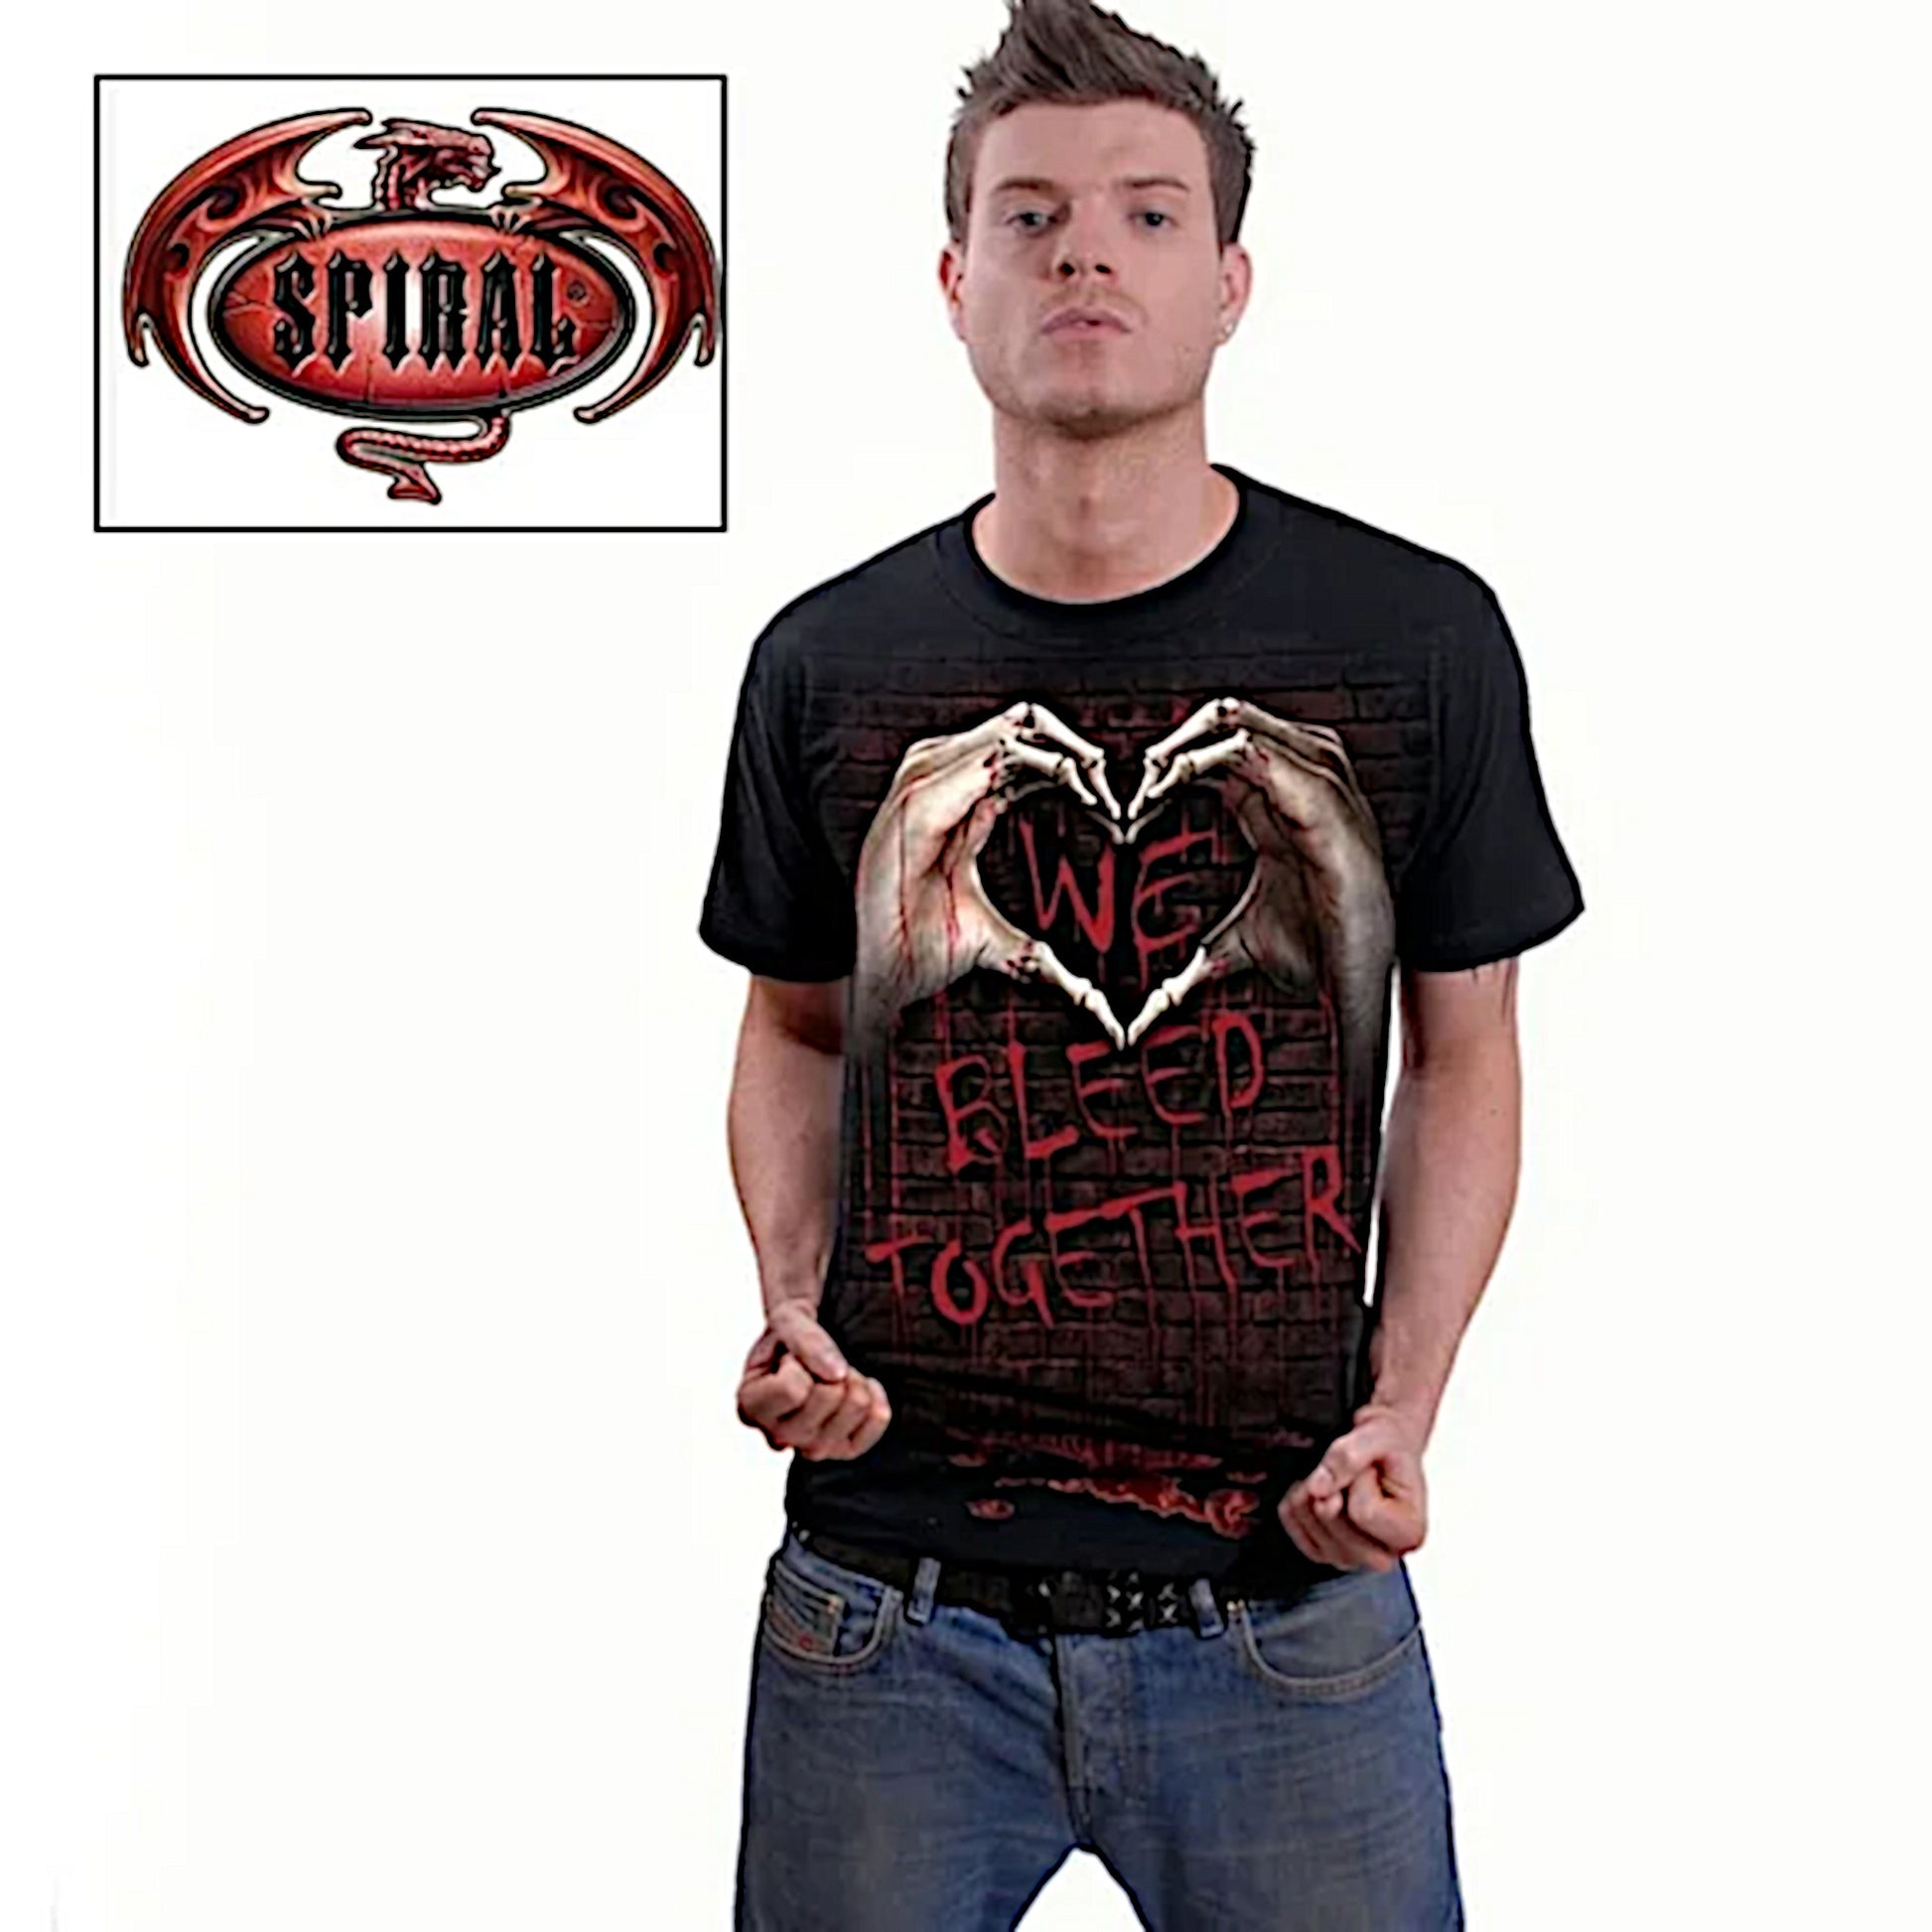 Men's Graphic Tee | We Bleed Together | Covid-19 Collectors Black Tee - Spiral Direct - Shirts